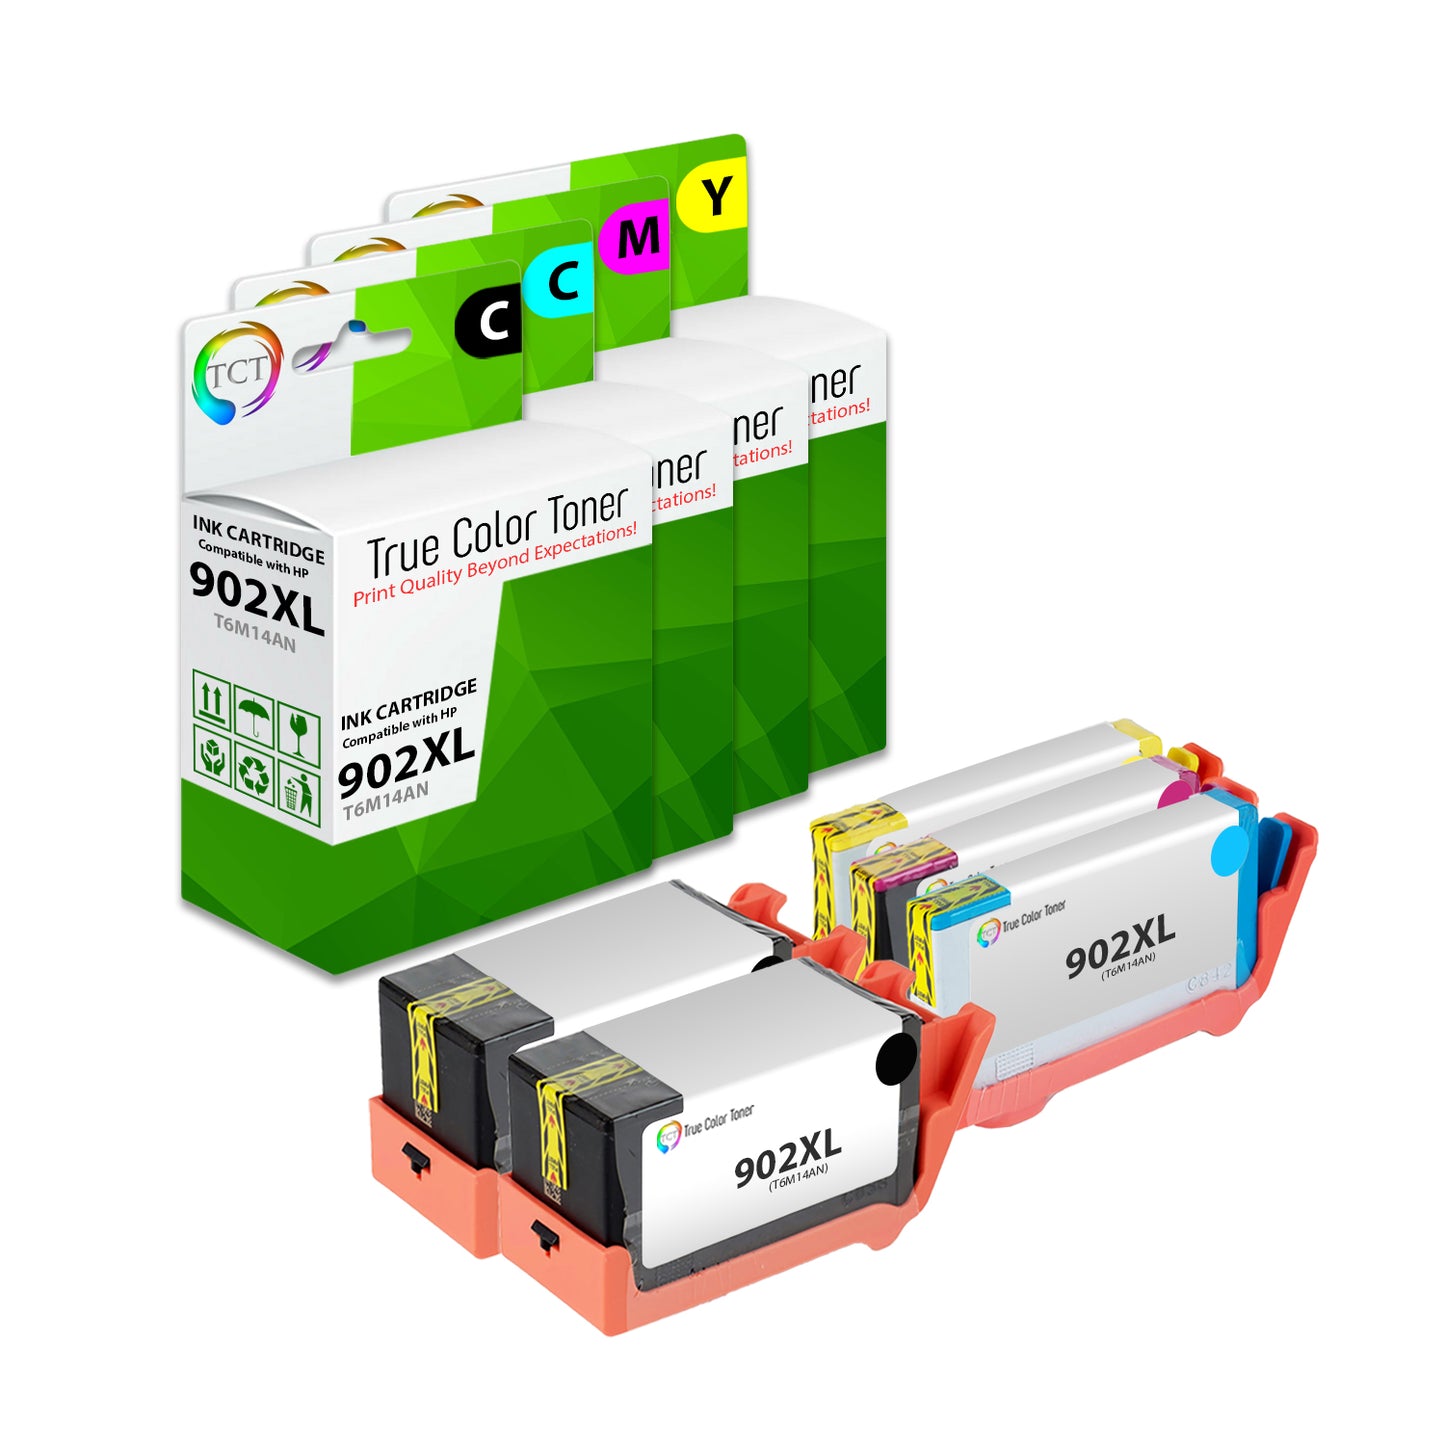 TCT Compatible Ink Cartridge Replacement for the HP 902XL Series - 5 Pack (B, C, M, Y)